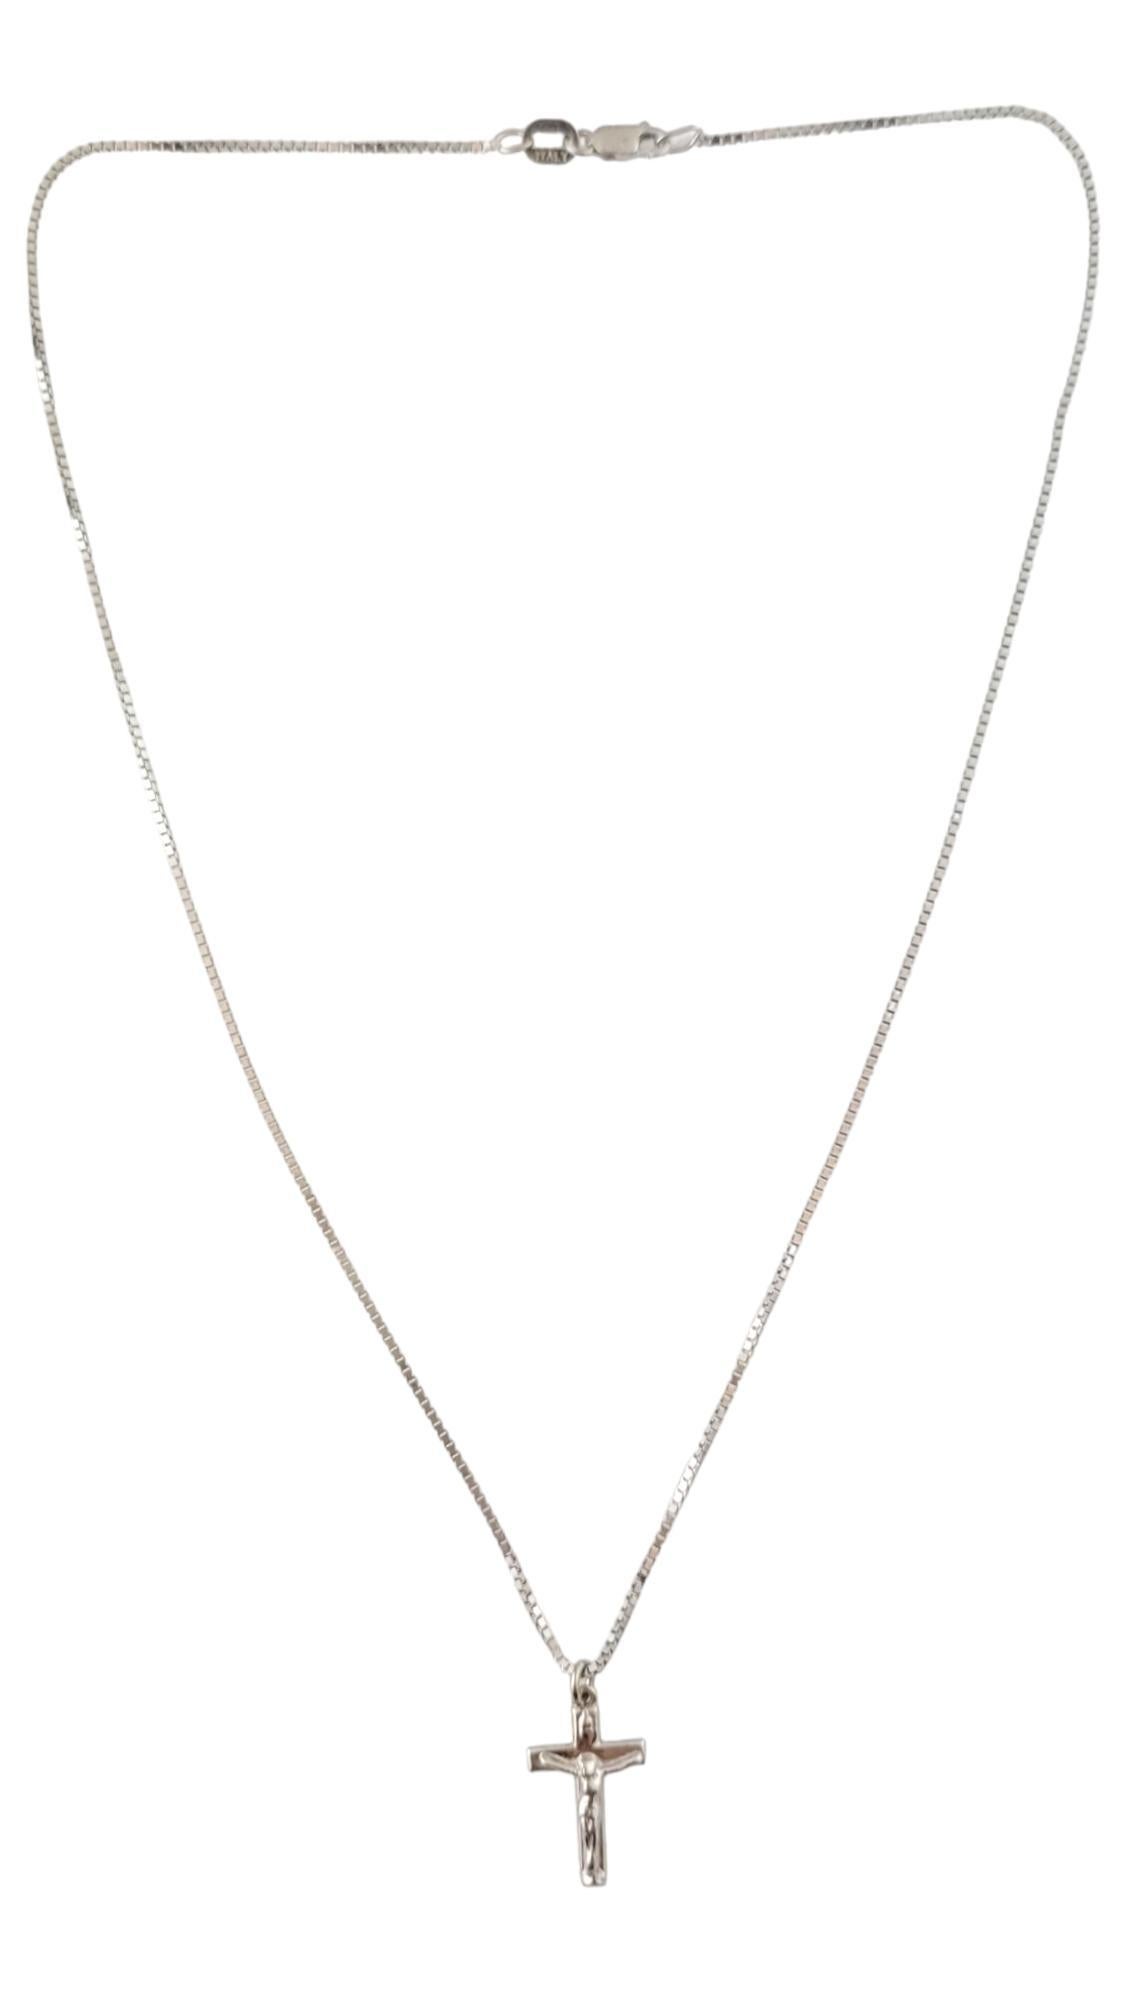 Vintage 14K White Gold Cross Pendant Chain Necklace

This beautiful piece features a gorgeous 14K gold cross pendant paired with a simple 14K white gold chain!

Chain length: 16 1/4